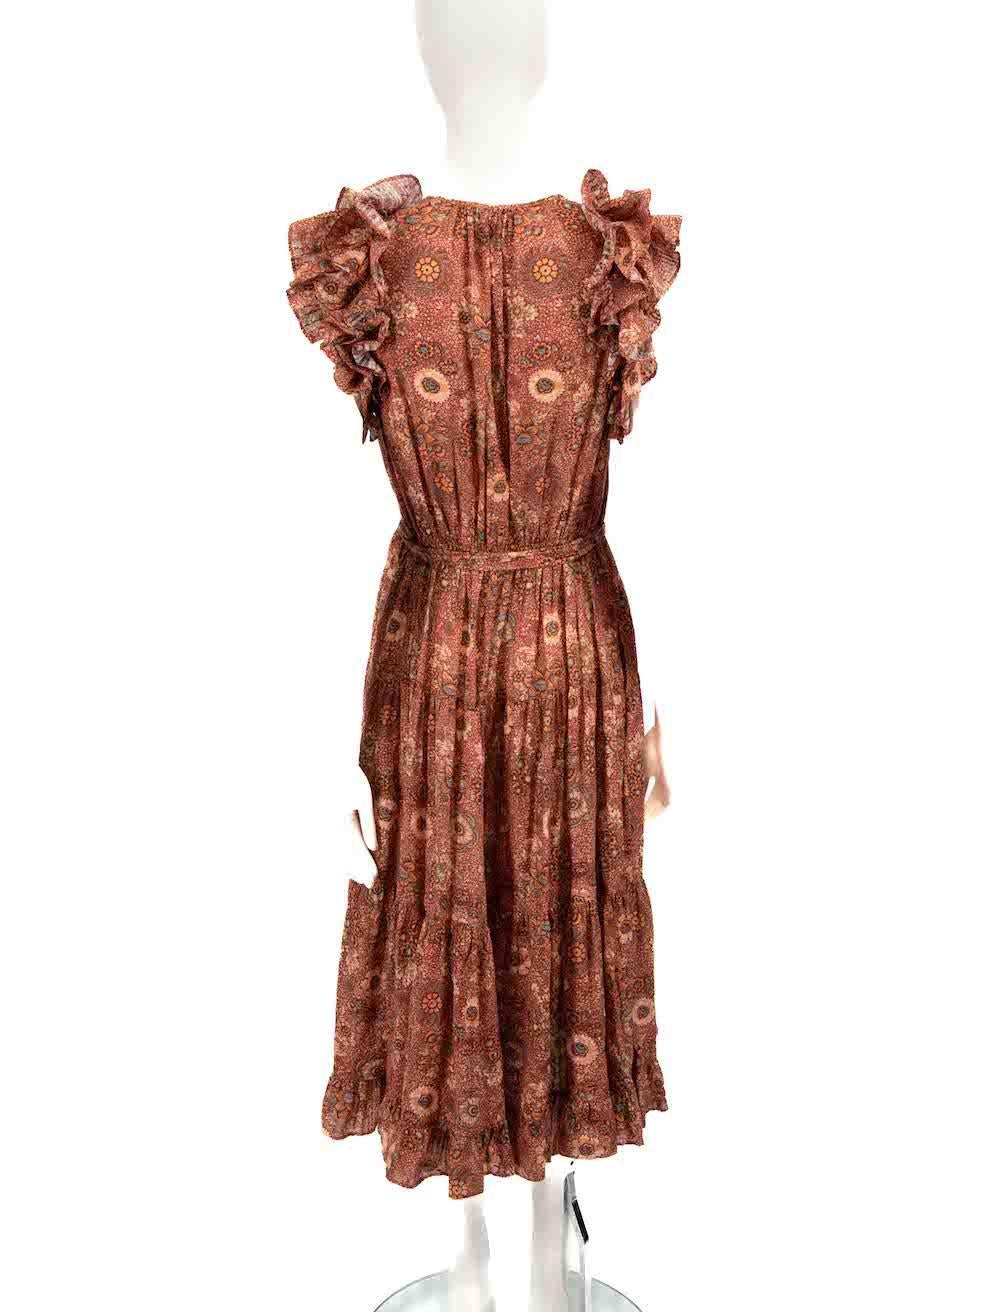 Ulla Johnson Floral Pattern Ruffle Midi Dress Size L In Excellent Condition For Sale In London, GB